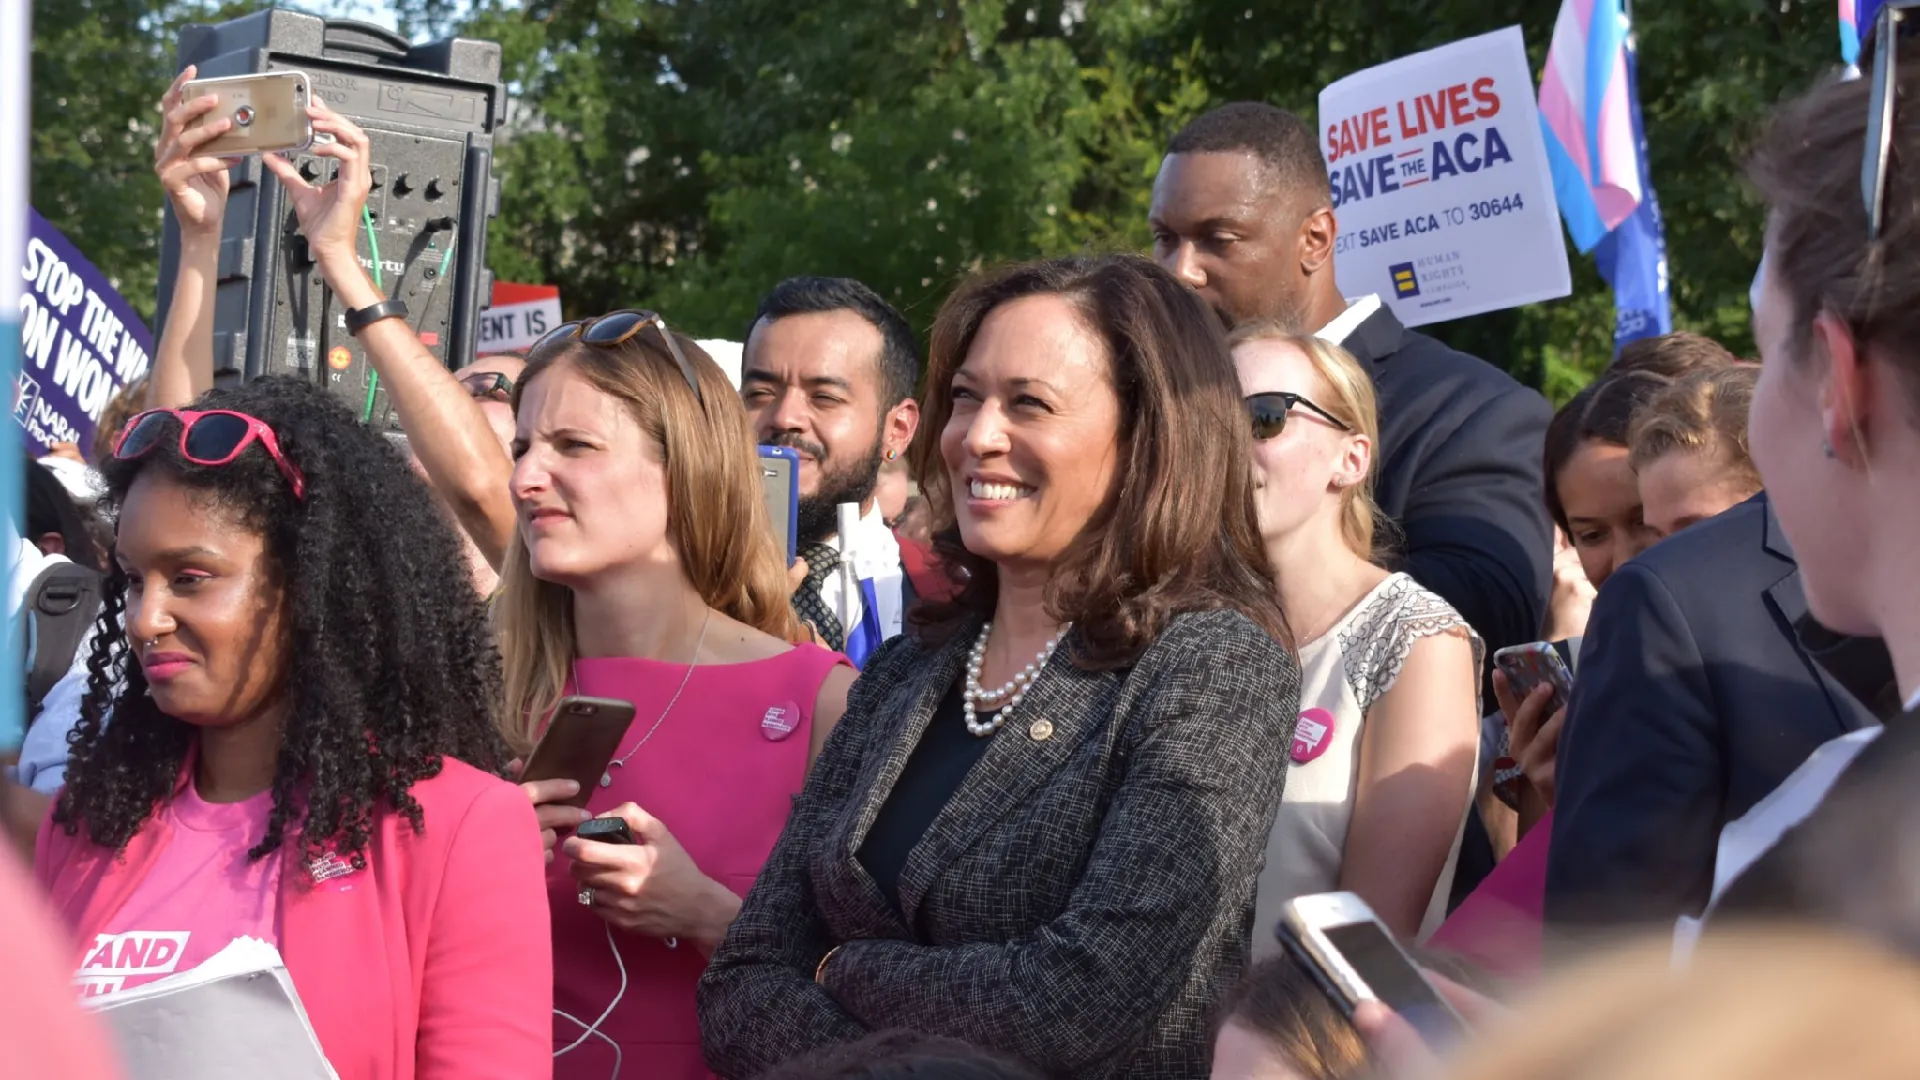 Kamala Harris's Incoherent Speech Raises Concerns About Her Ability to Lead in International Relations